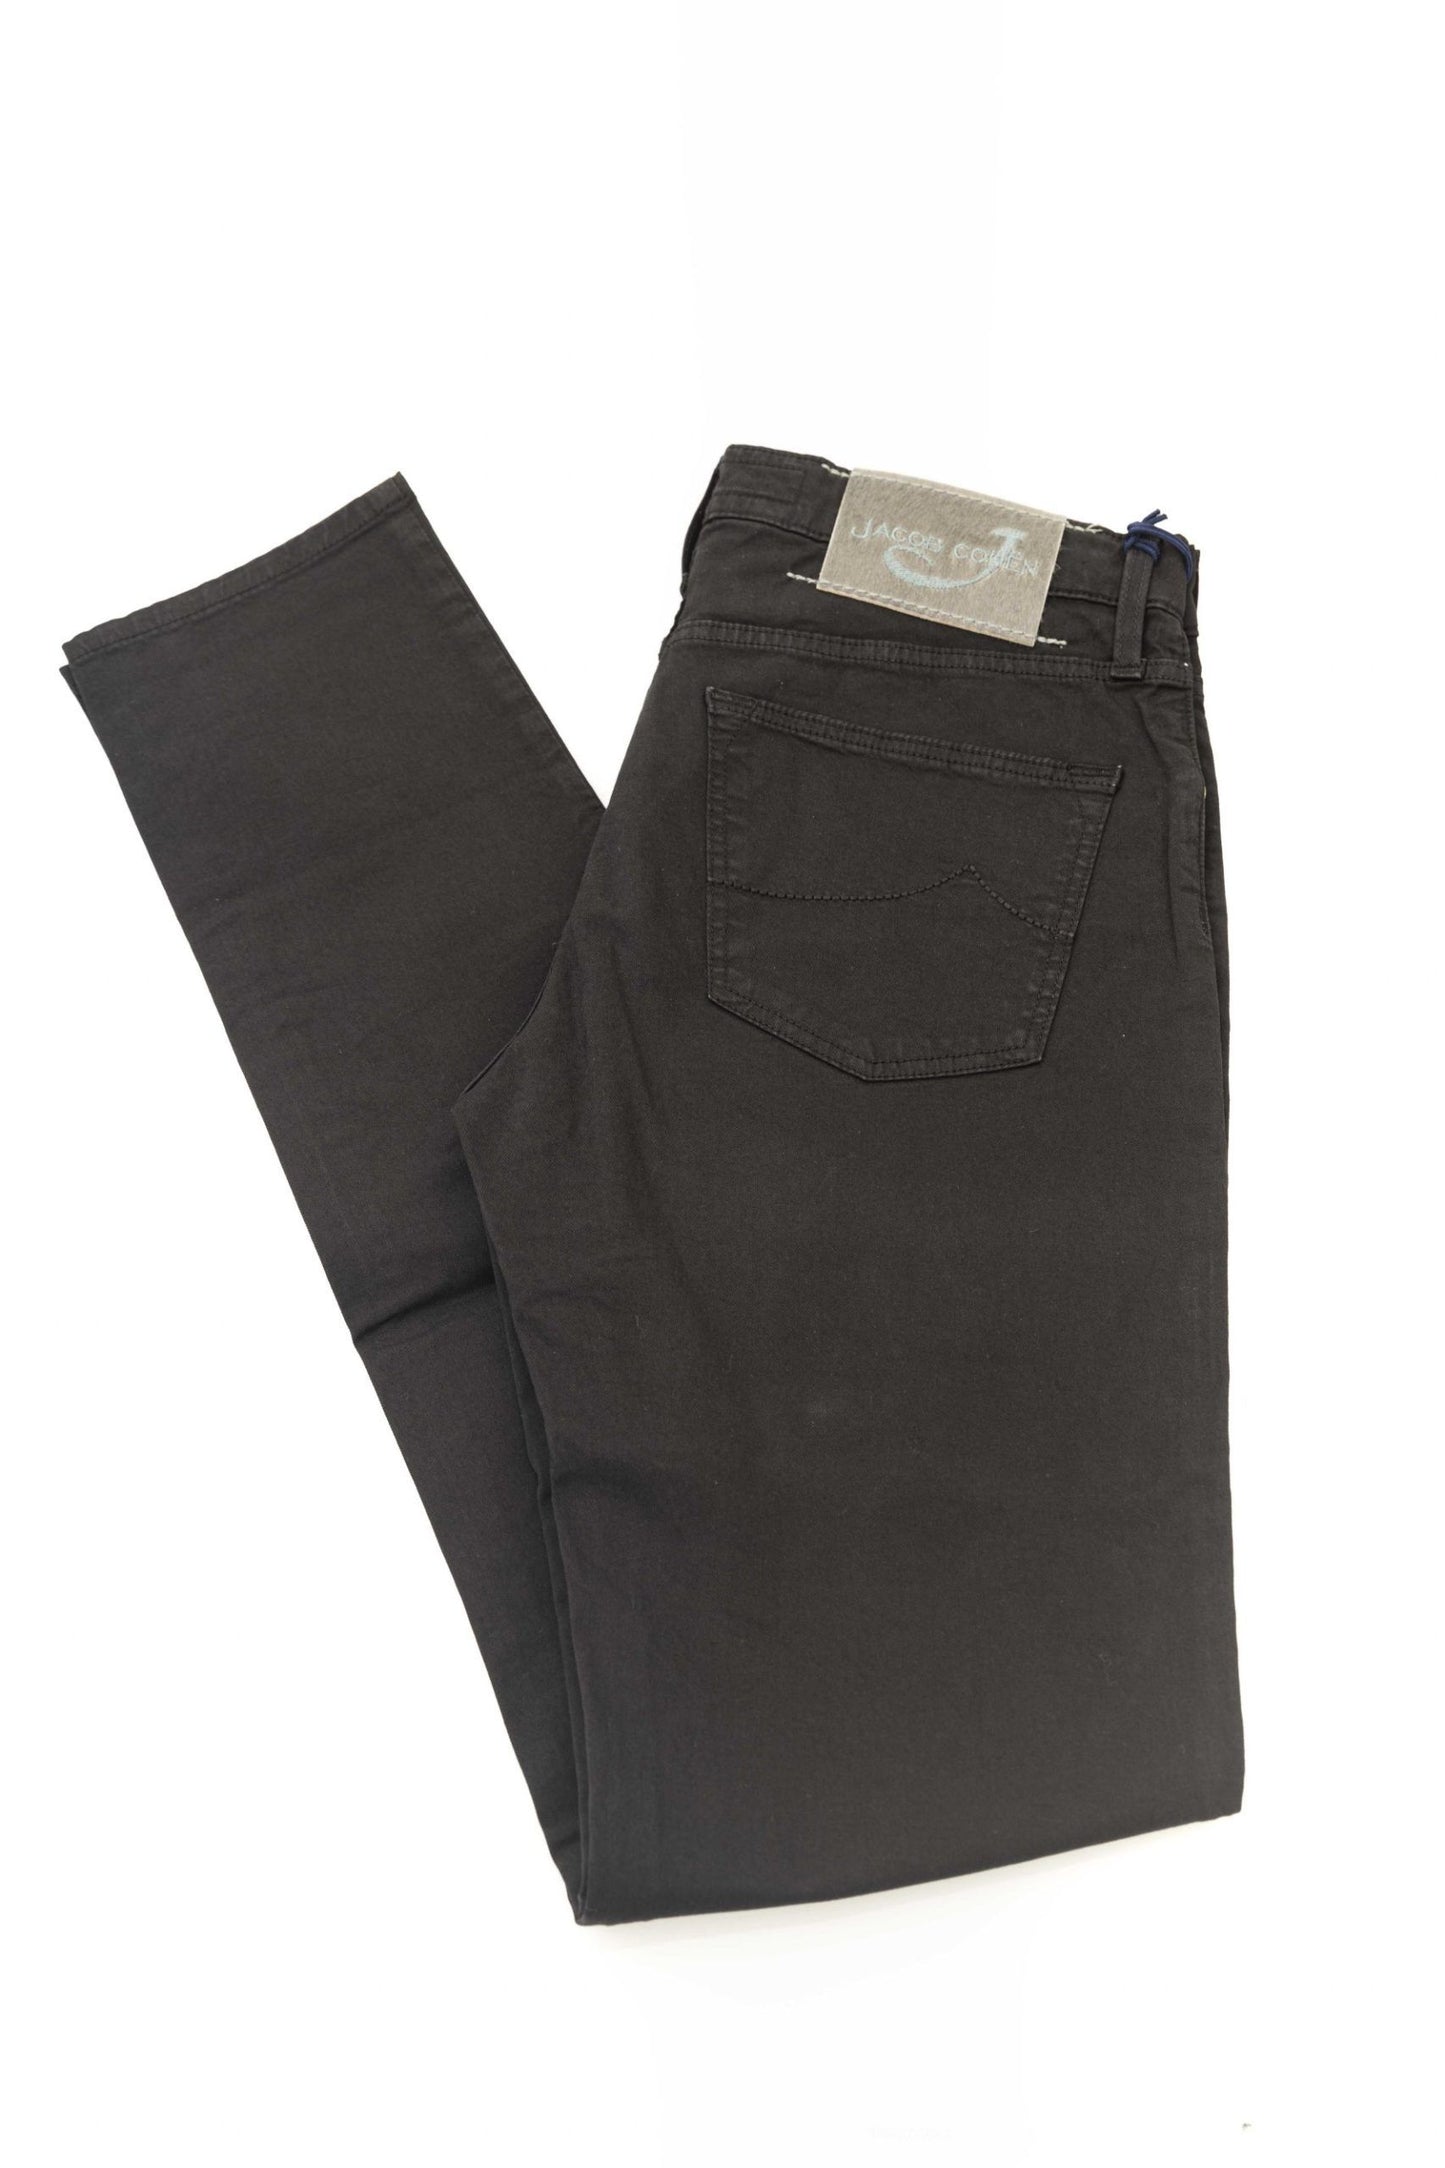 Black Cotton Jeans & Pant - Designed by Jacob Cohen Available to Buy at a Discounted Price on Moon Behind The Hill Online Designer Discount Store